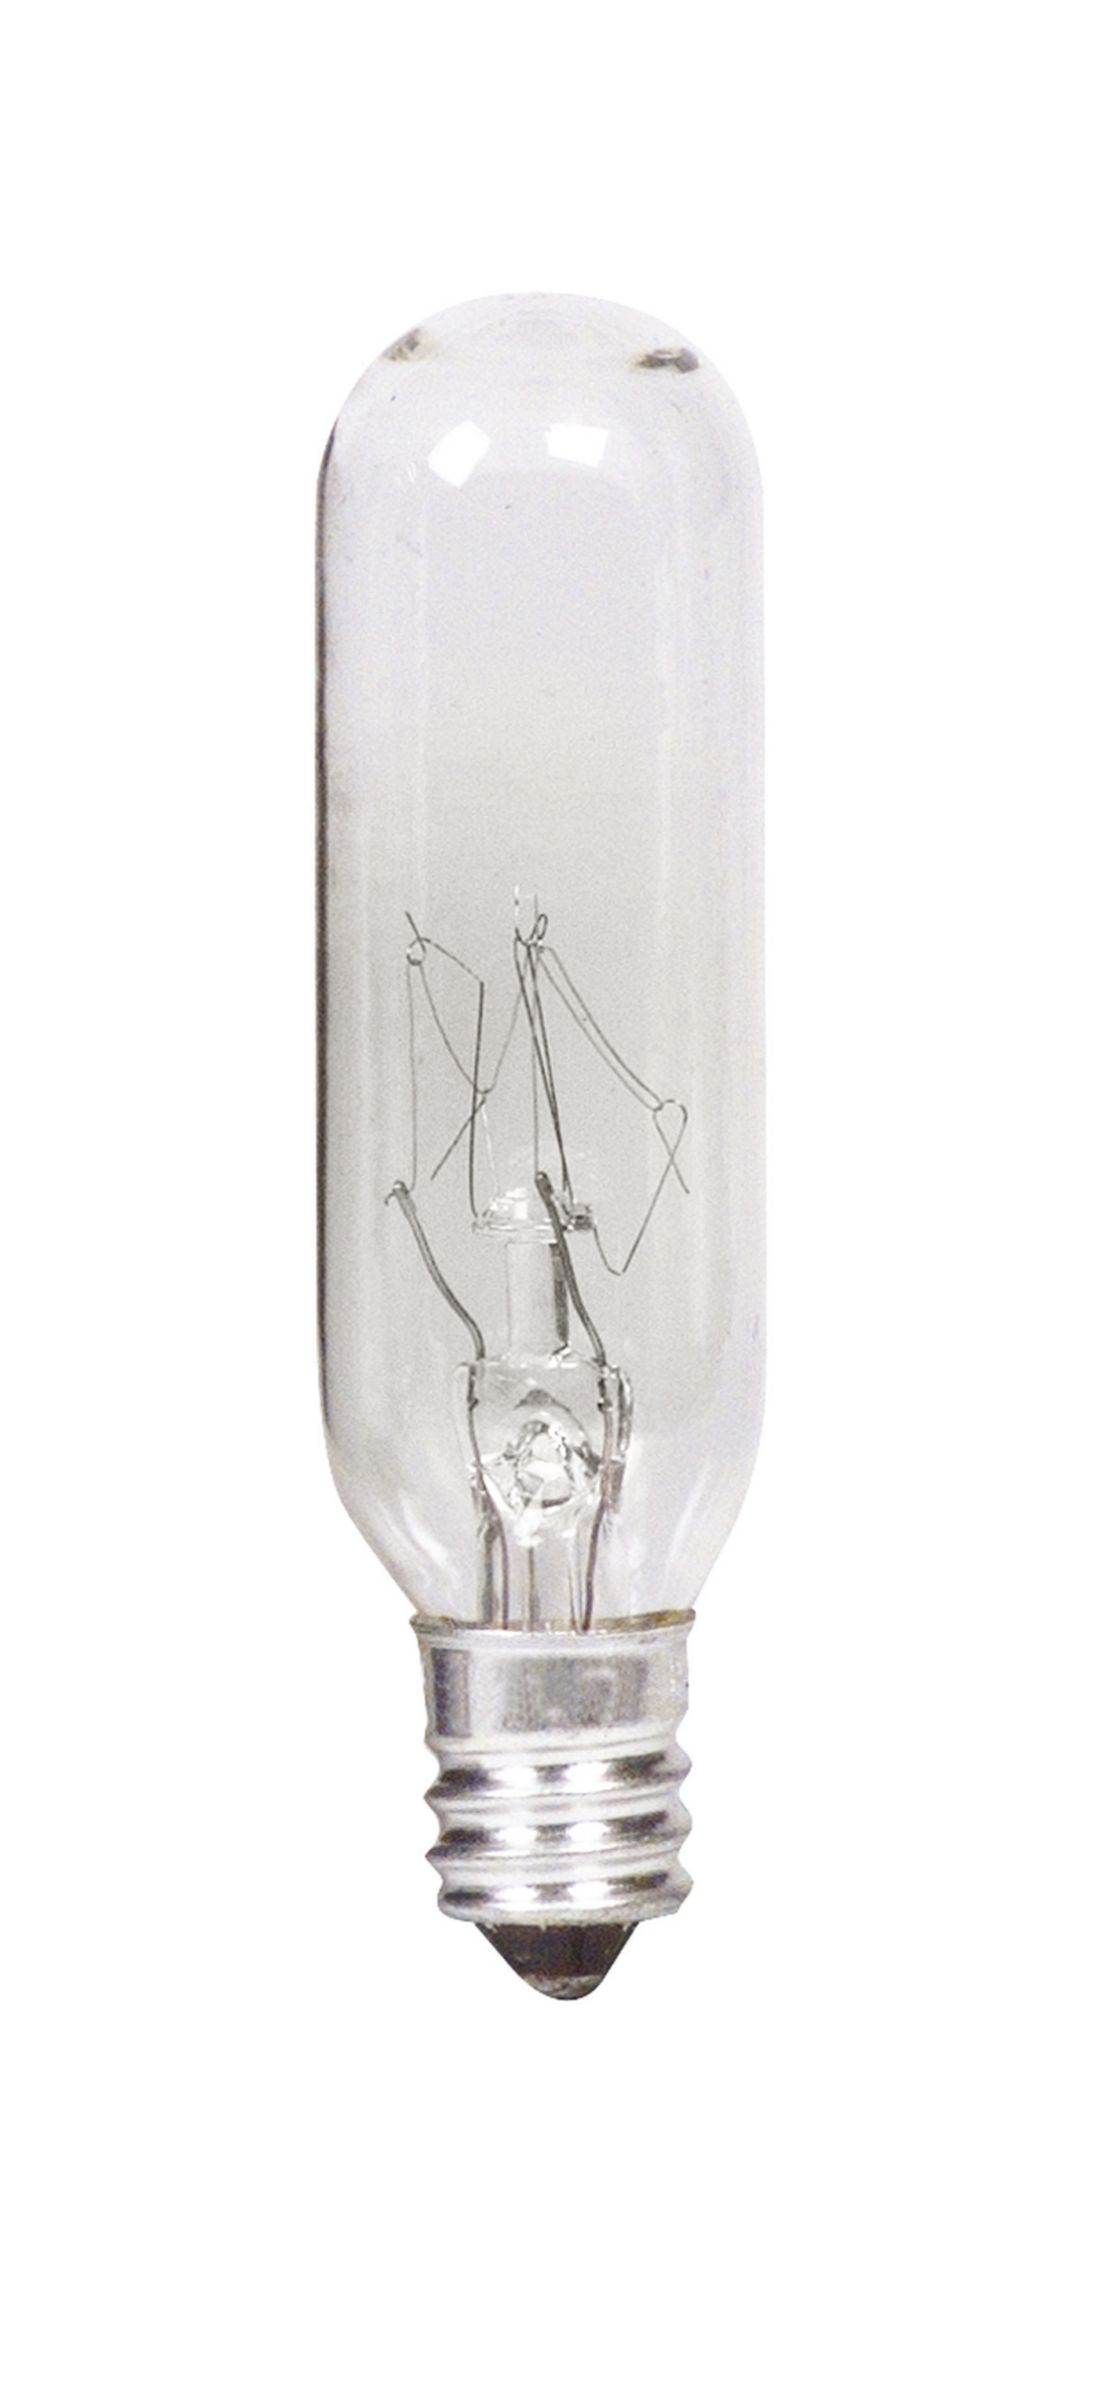 248153 (15T6) Incandescent Lamp Philips Lighting;Signify Lamps